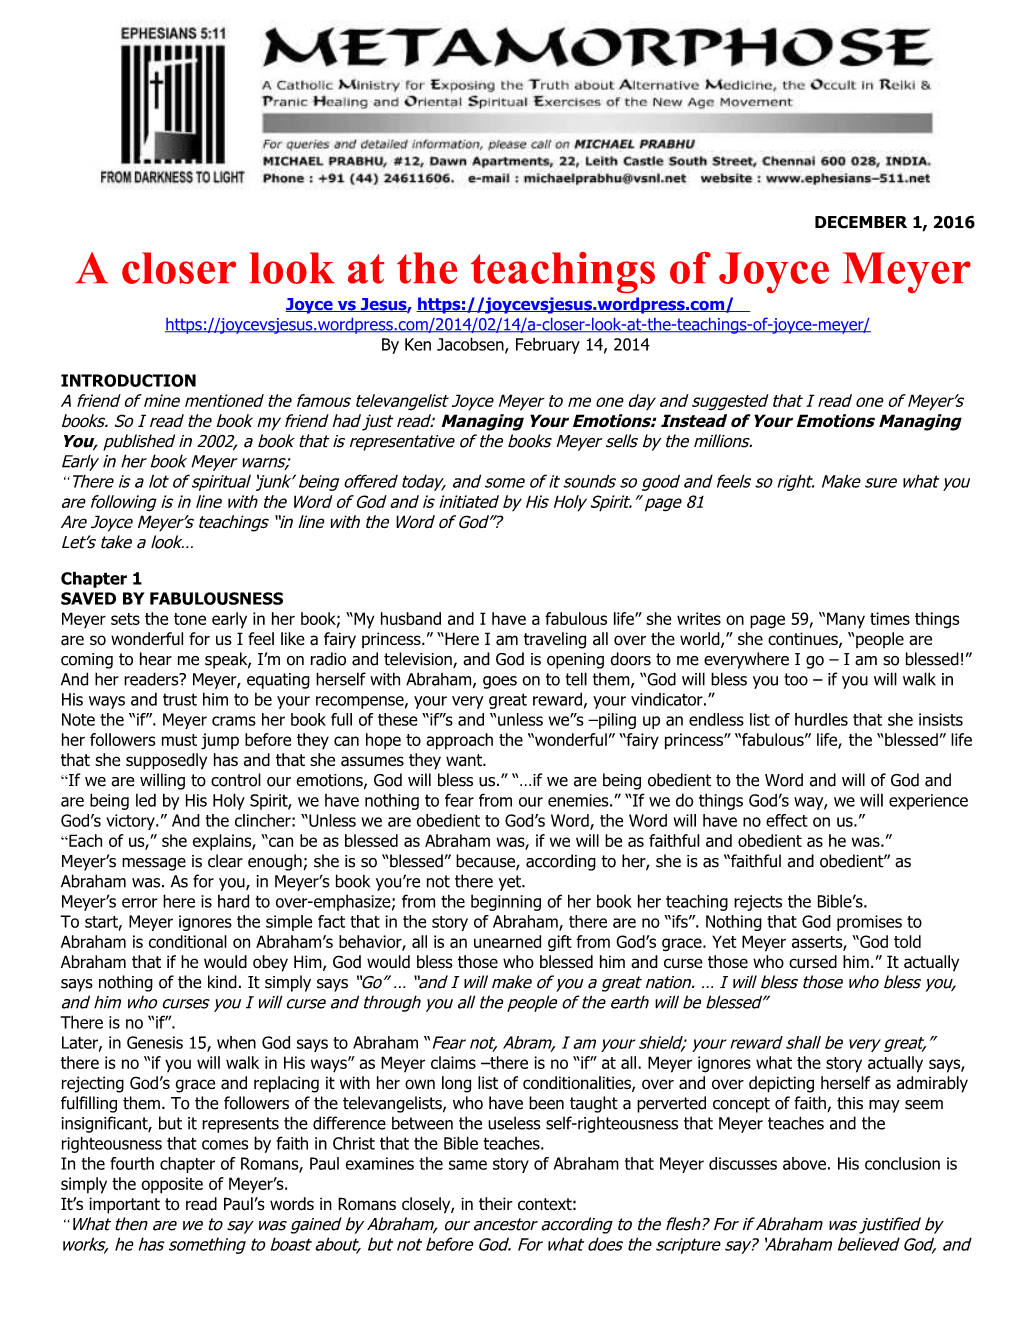 A Closer Look at the Teachings of Joyce Meyer